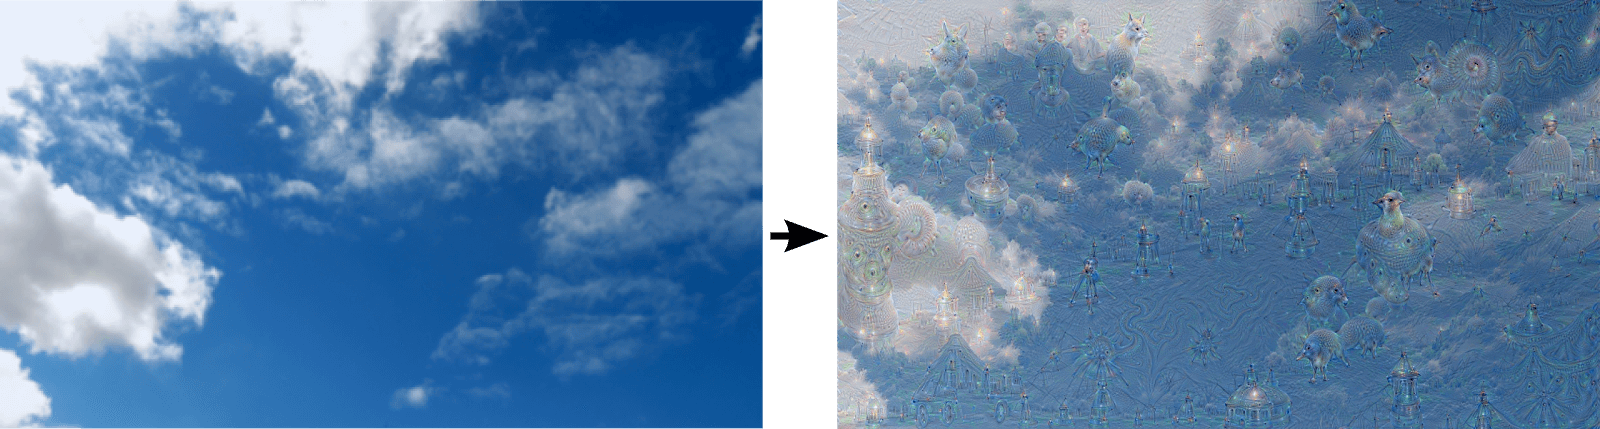 Figure 7.5  Picture of clouds before (left) and after (right) being transformed by DeepDream, 2015.